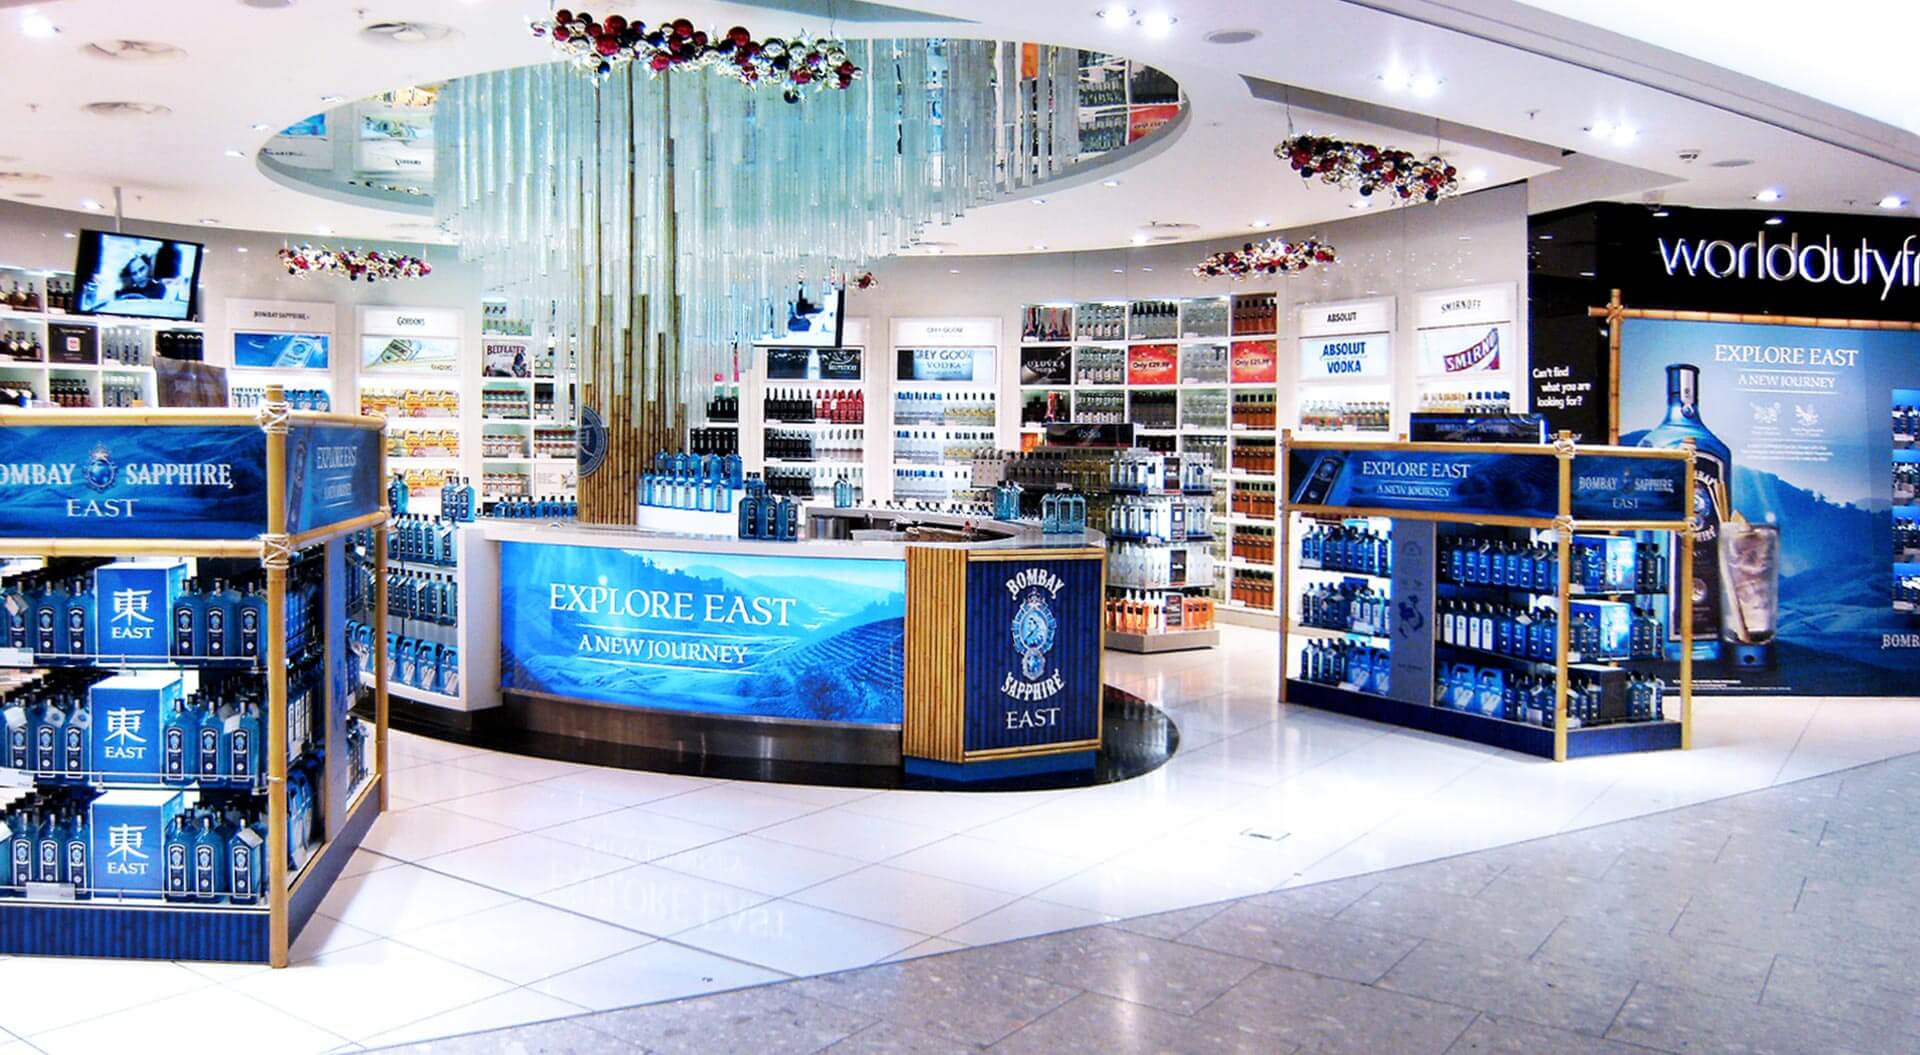 Bombay Sapphire East store design and branding for World Duty Free Heathrow Terminal 5 airport